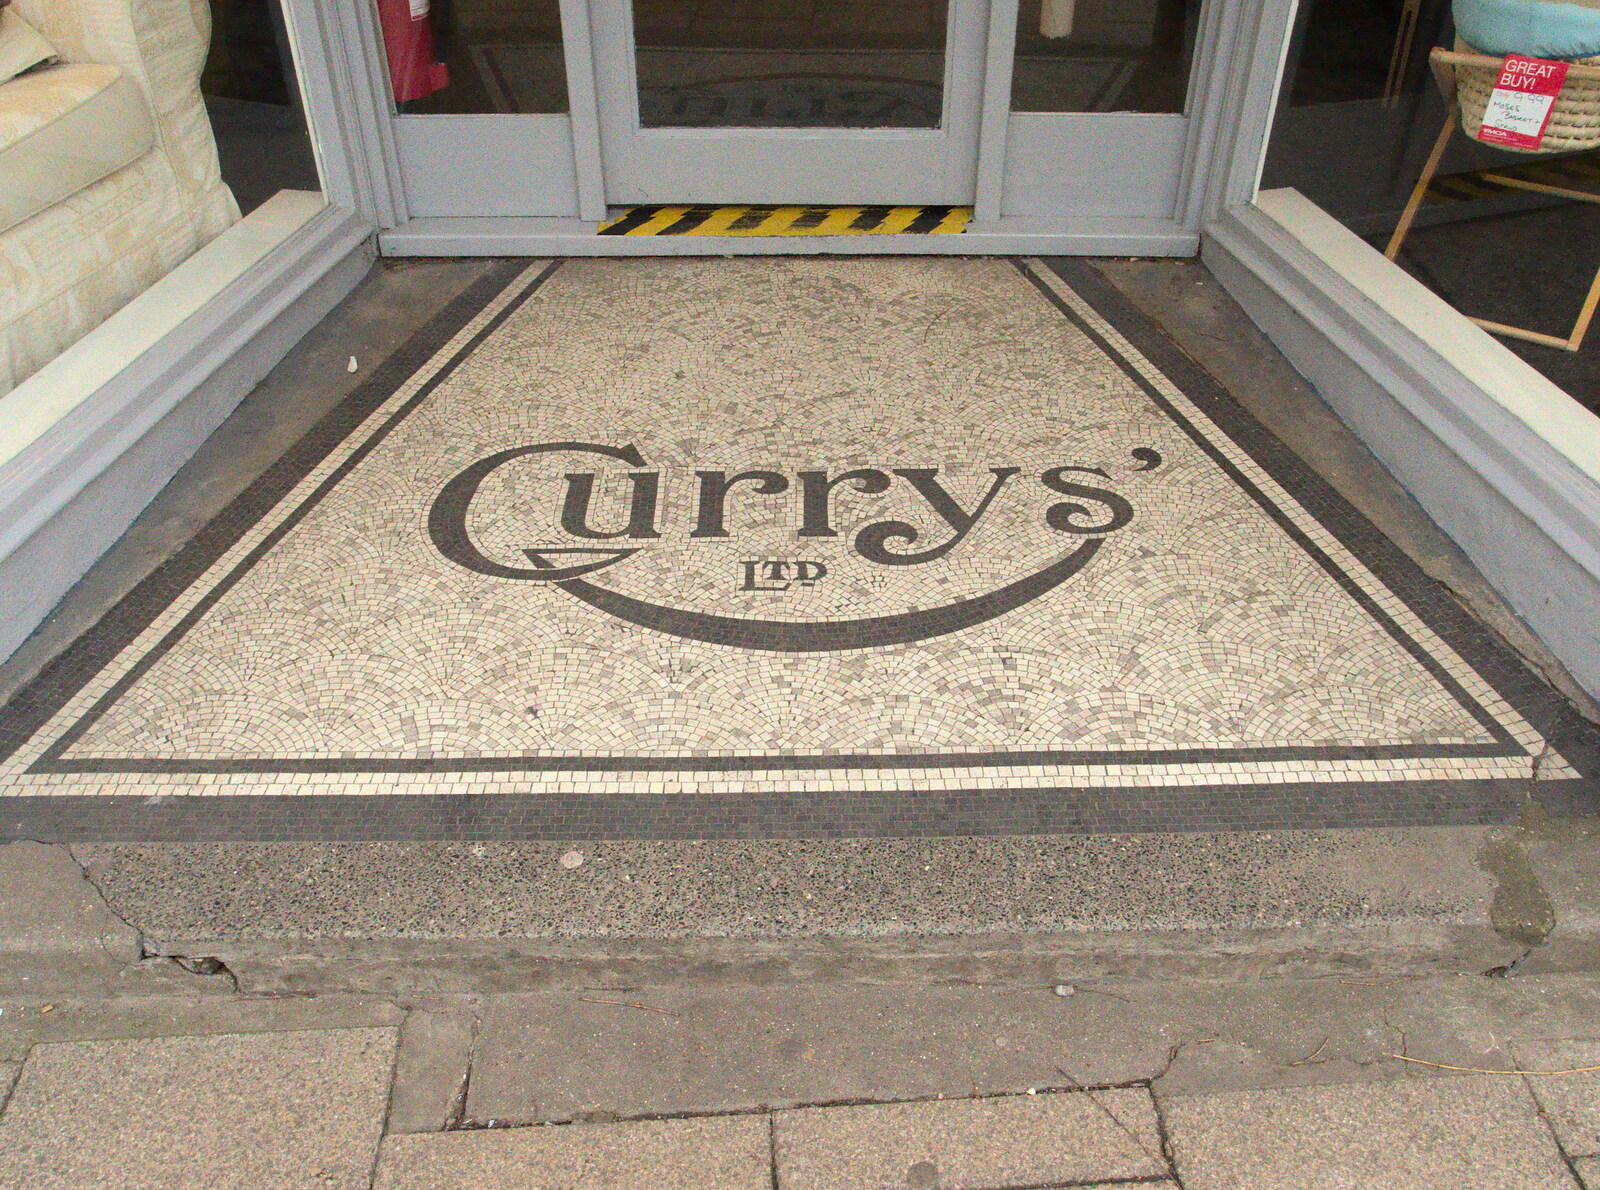 The old Curry's Ltd mosaic porch sign from Closing Down: A Late January Miscellany, Diss, Norfolk - 31st January 2015